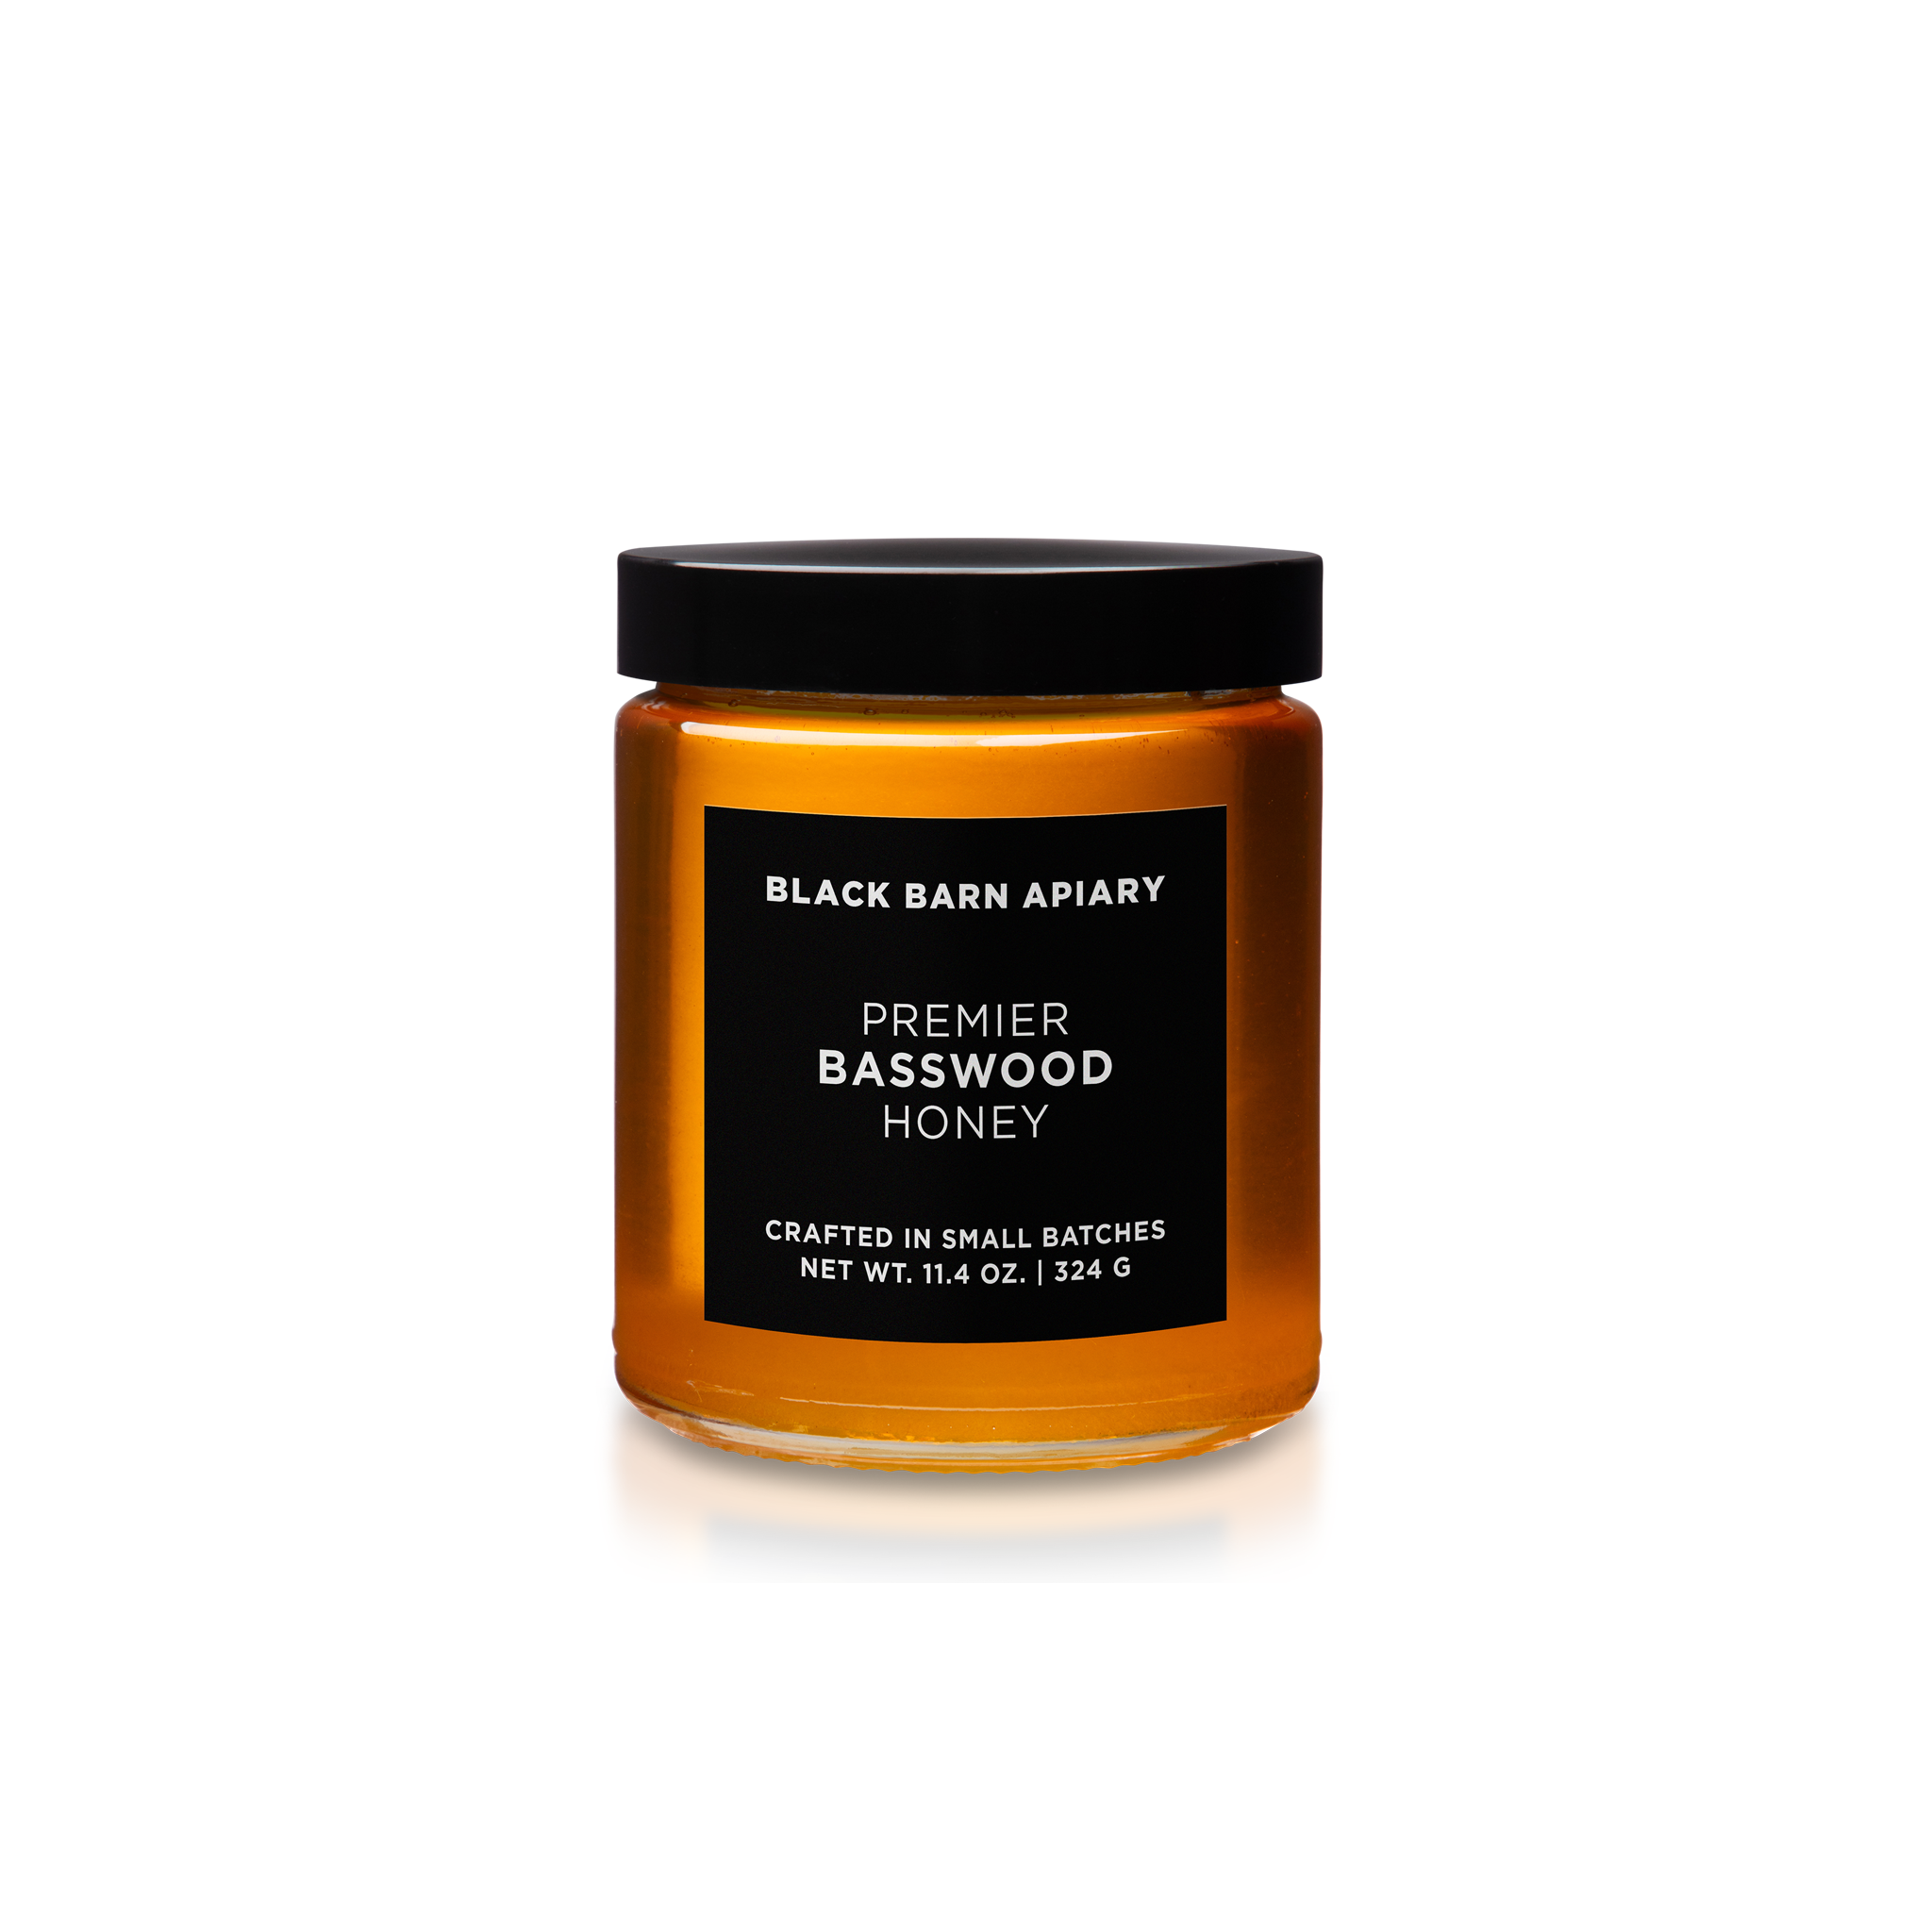 Black Barn Apiary - Premier Basswood Honey - Crafted In Small Batches - Net Wt. 11oz 324G